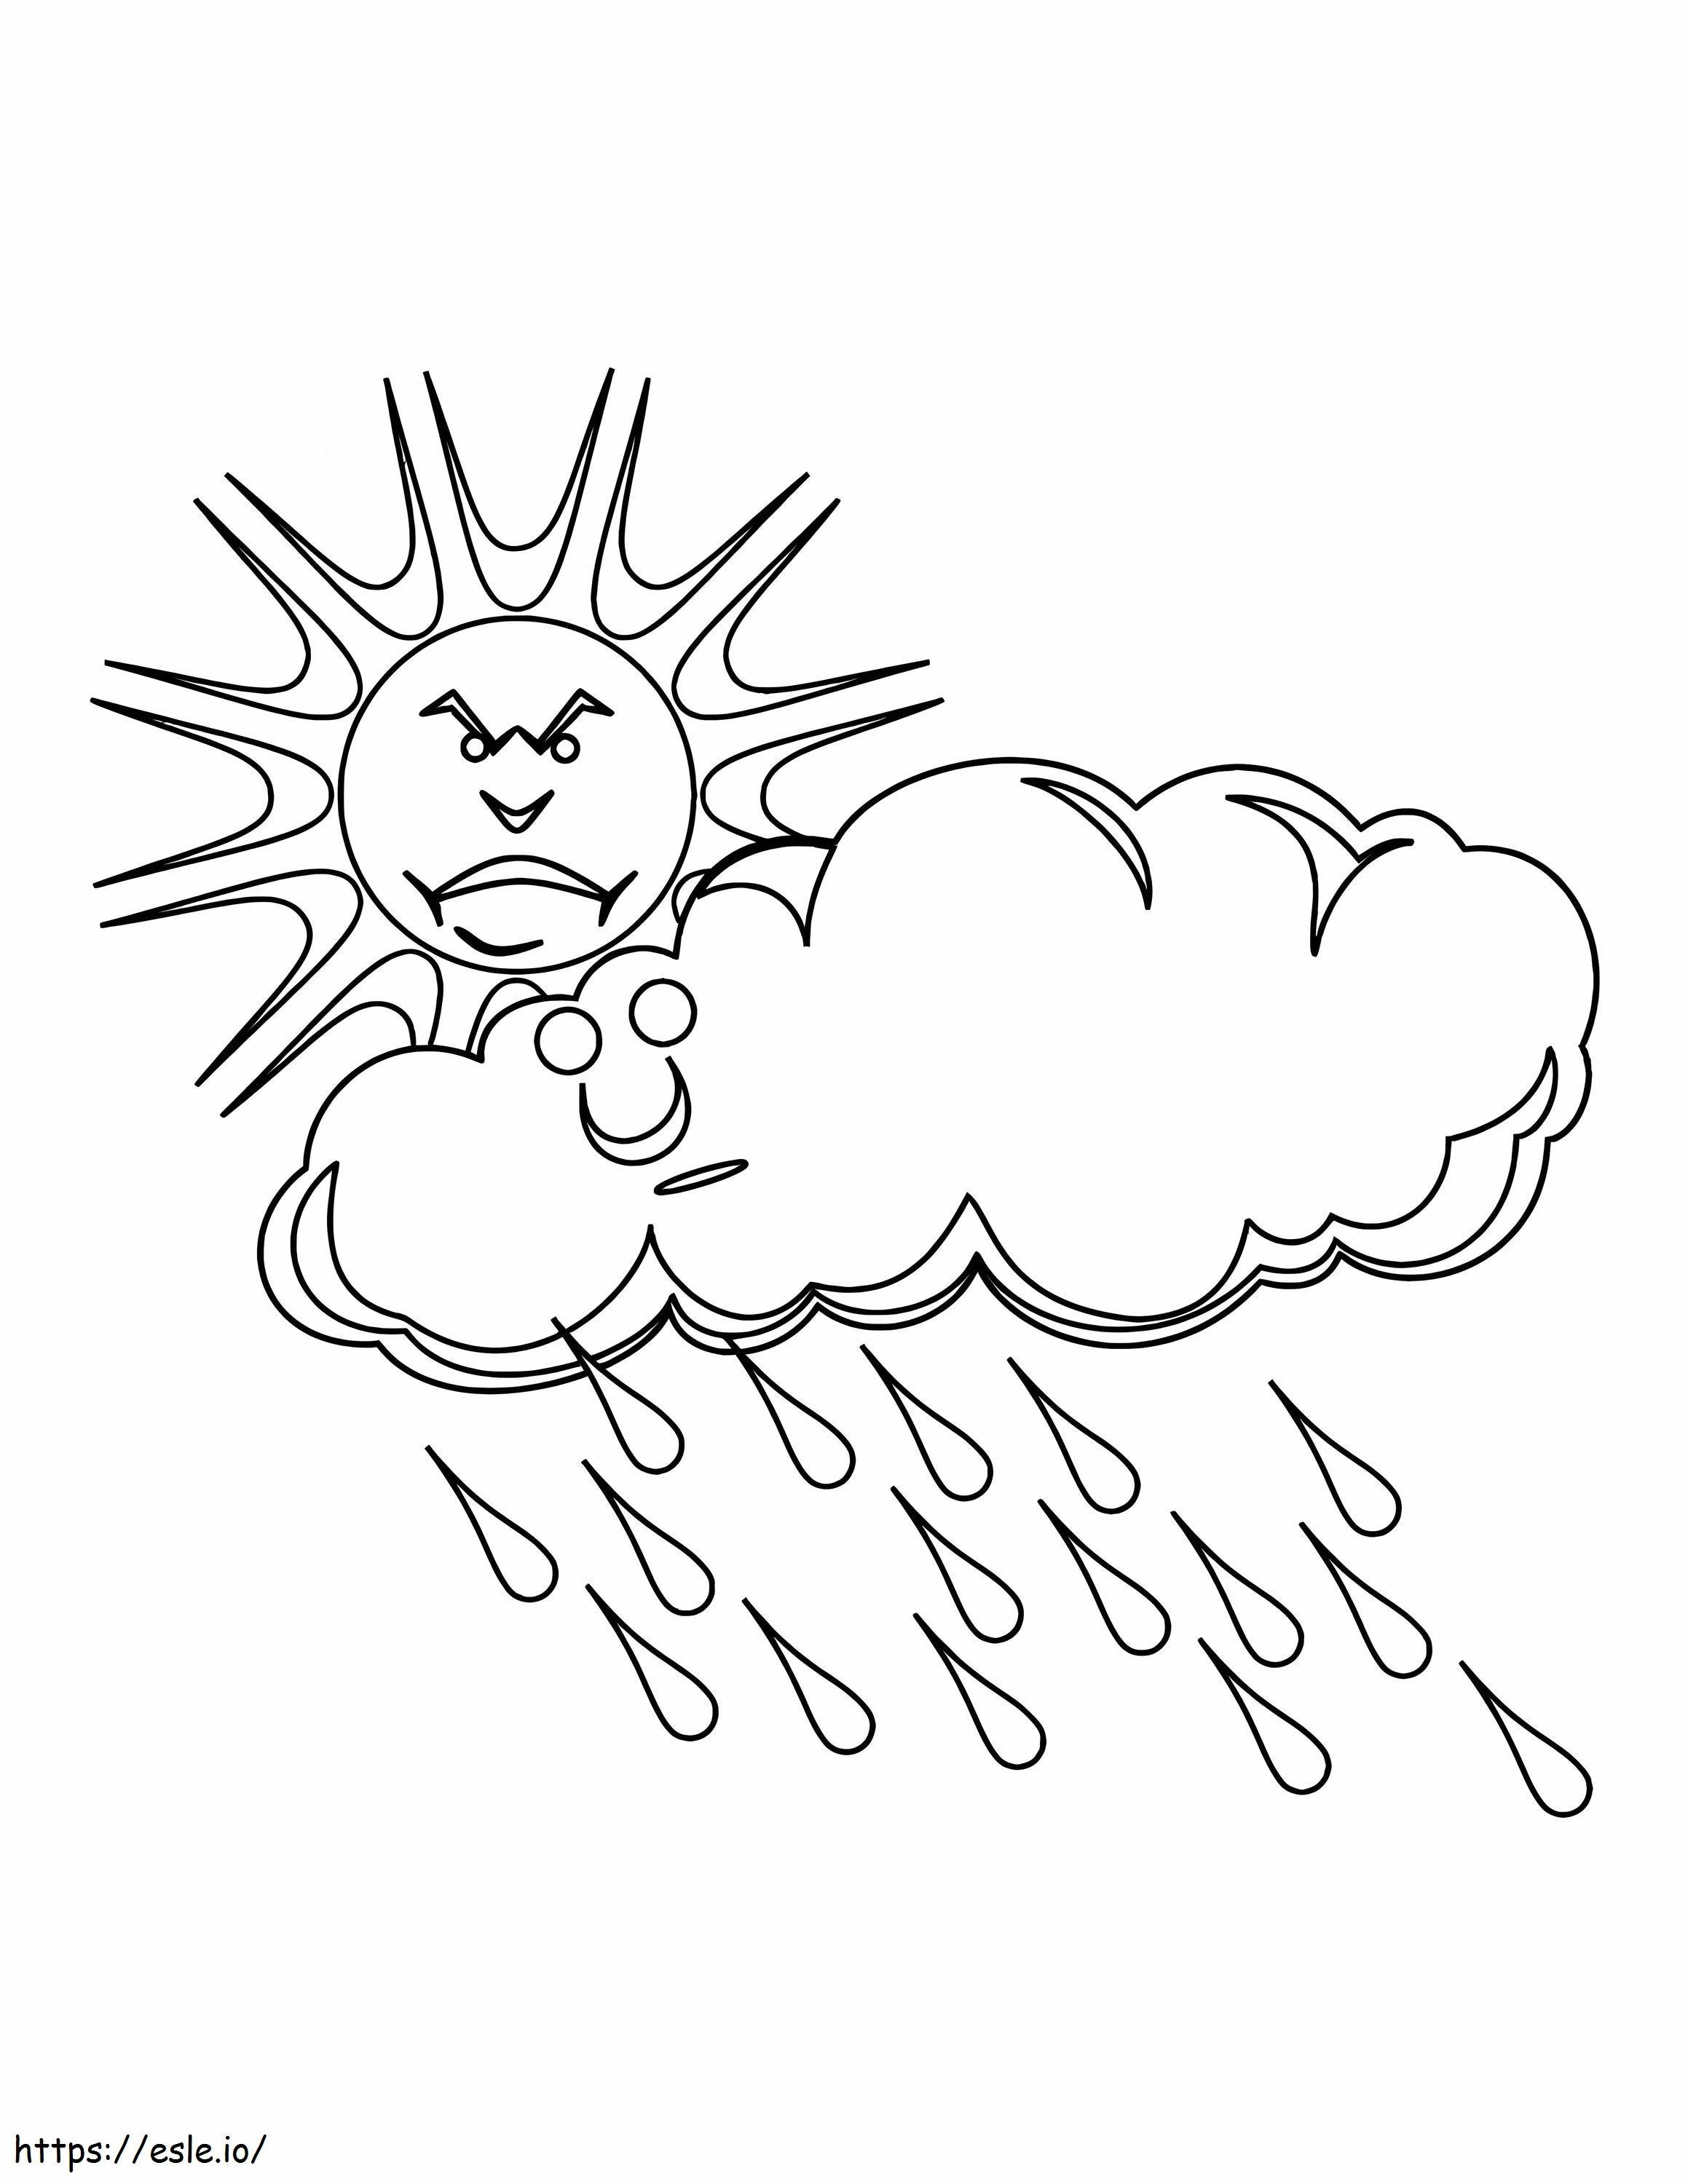 Sun Angry With Rain Of Clouds coloring page